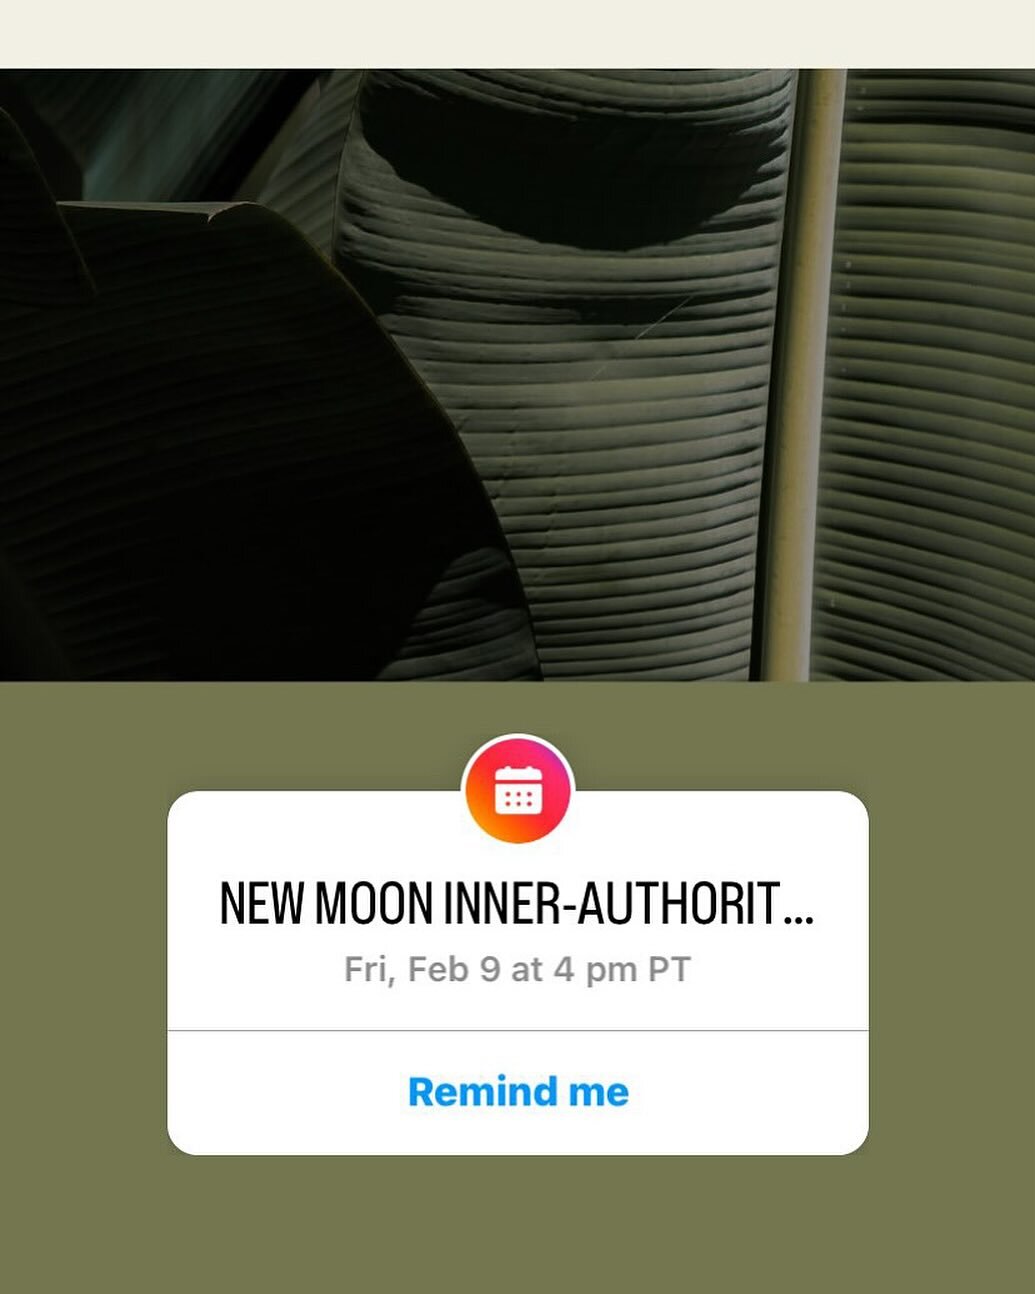 Please join me for a Healing New Moon Inner-Authority Meditation and Energetic Tune Up today, Feb. 9th, at 4 pm PST on Instagram Live. Get a reminder by clicking button above.

What does Inner-Authority mean to you? Let&rsquo;s tune-in together using